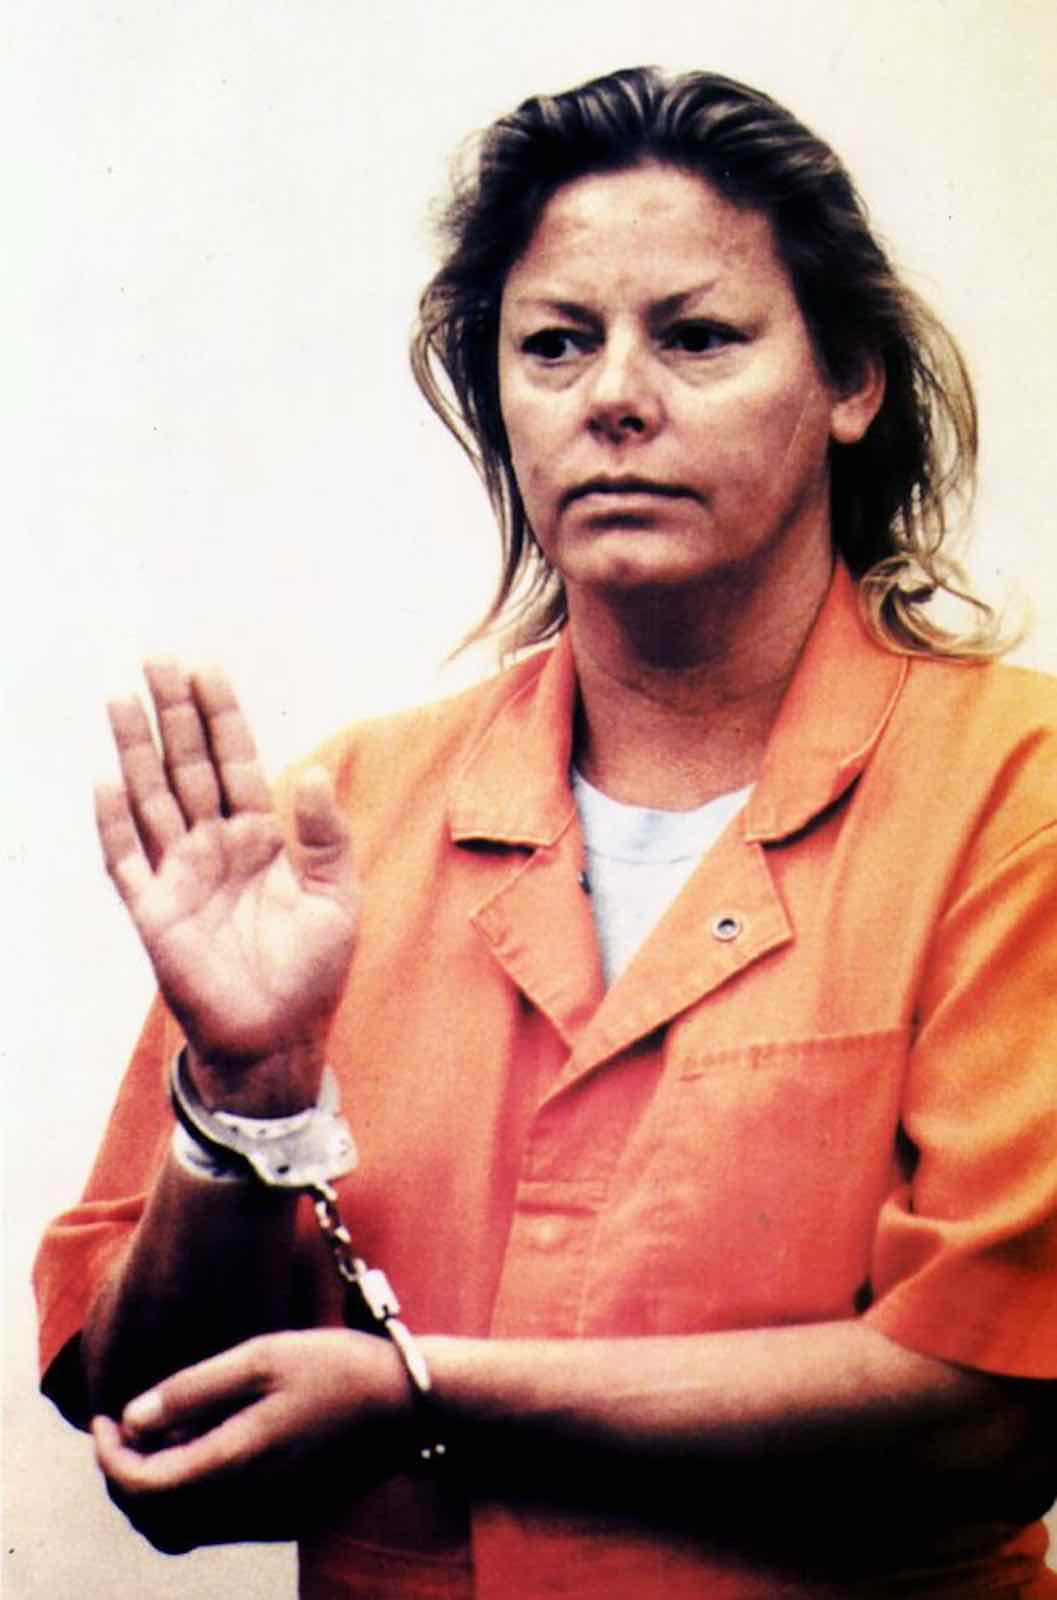 American serial killer: Here&amp;#39;s why Aileen Wuornos was a &amp;#39;Monster ...